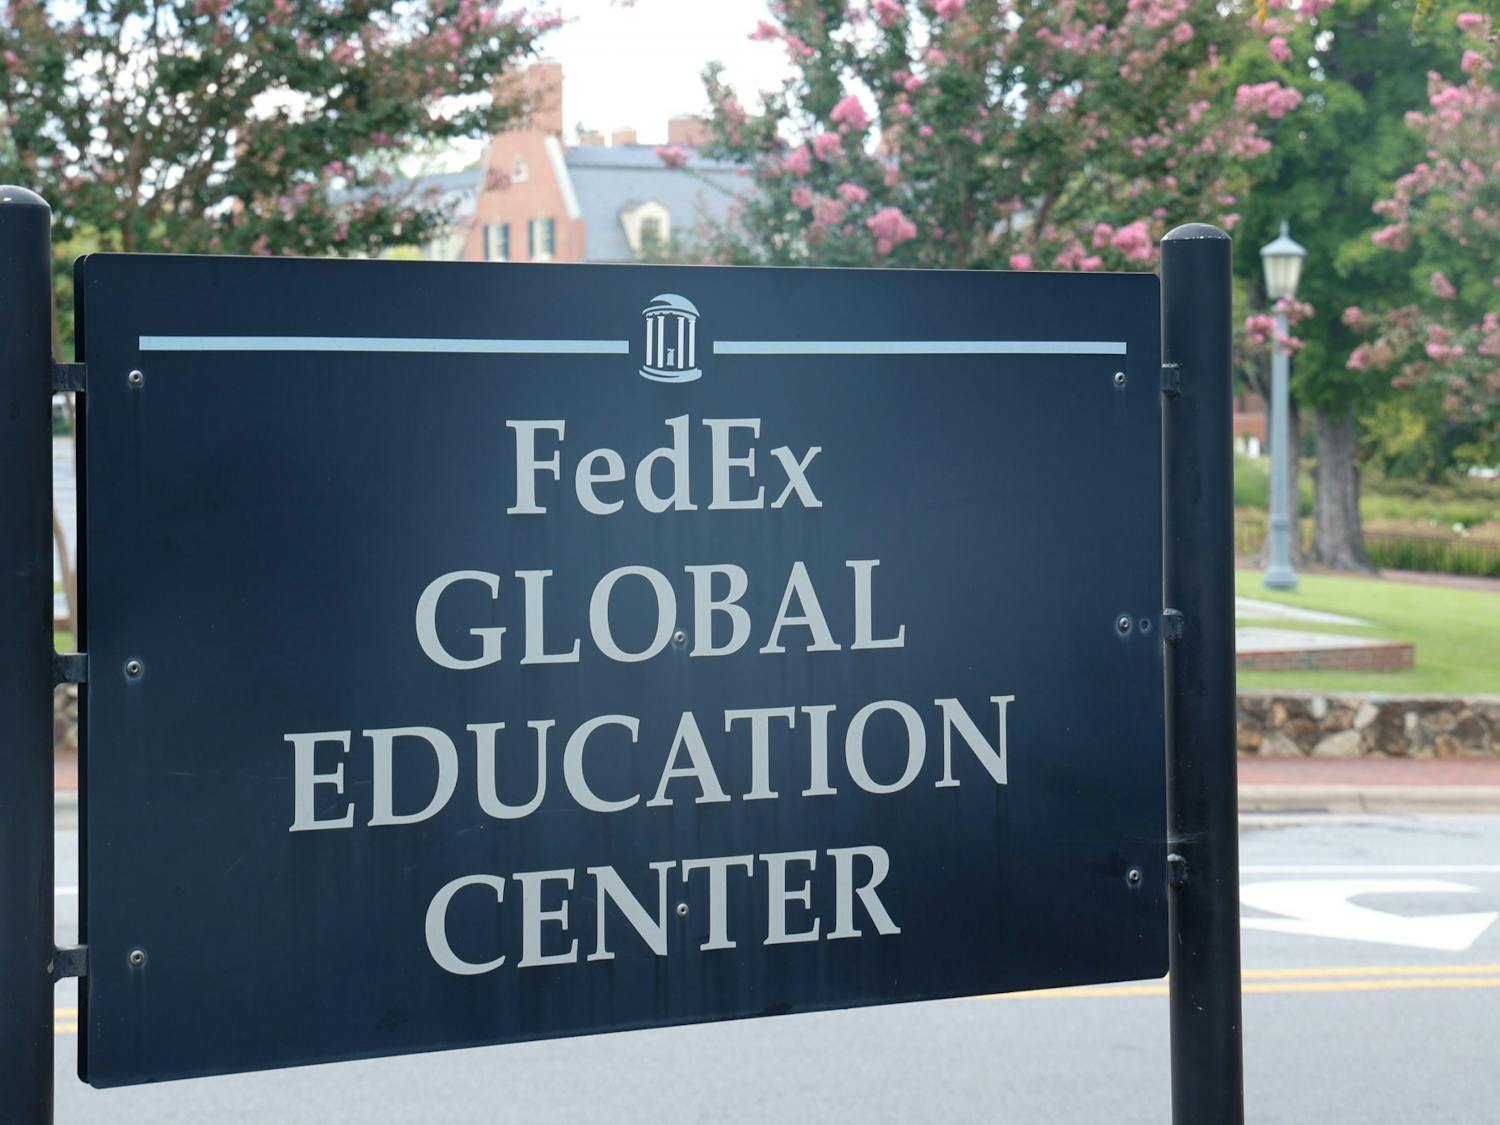 The FedEx Global Education Center on Sunday August 29th, 2022.